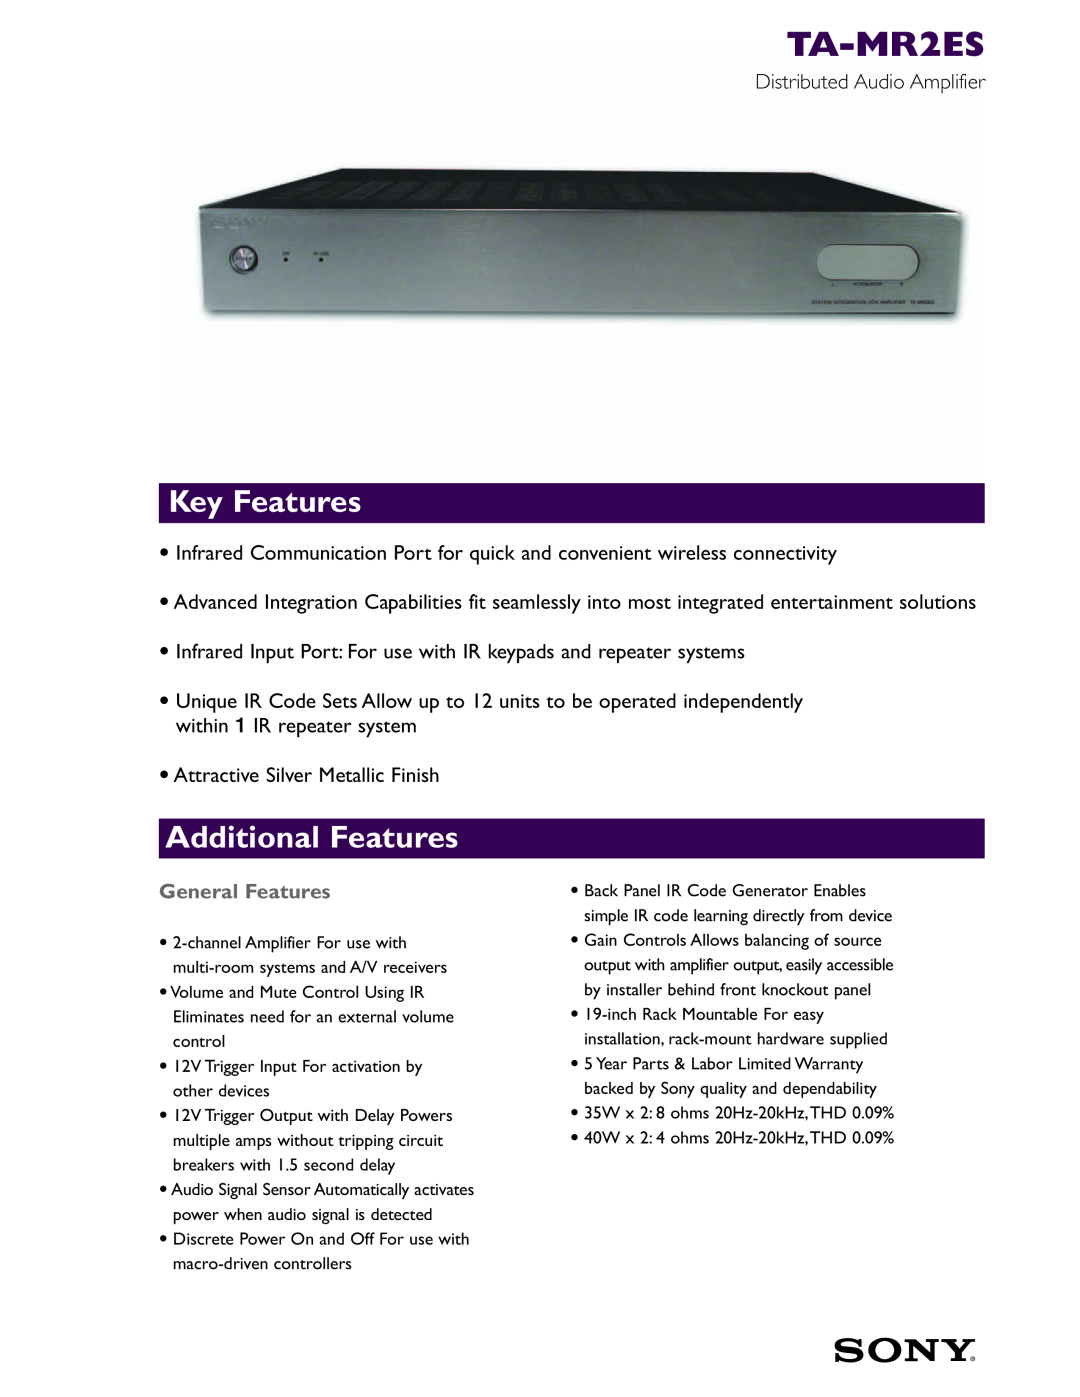 Sony Stereo Amplifier, 374 warranty TA-MR2ES, Key Features, Additional Features, Distributed Audio Amplifier 